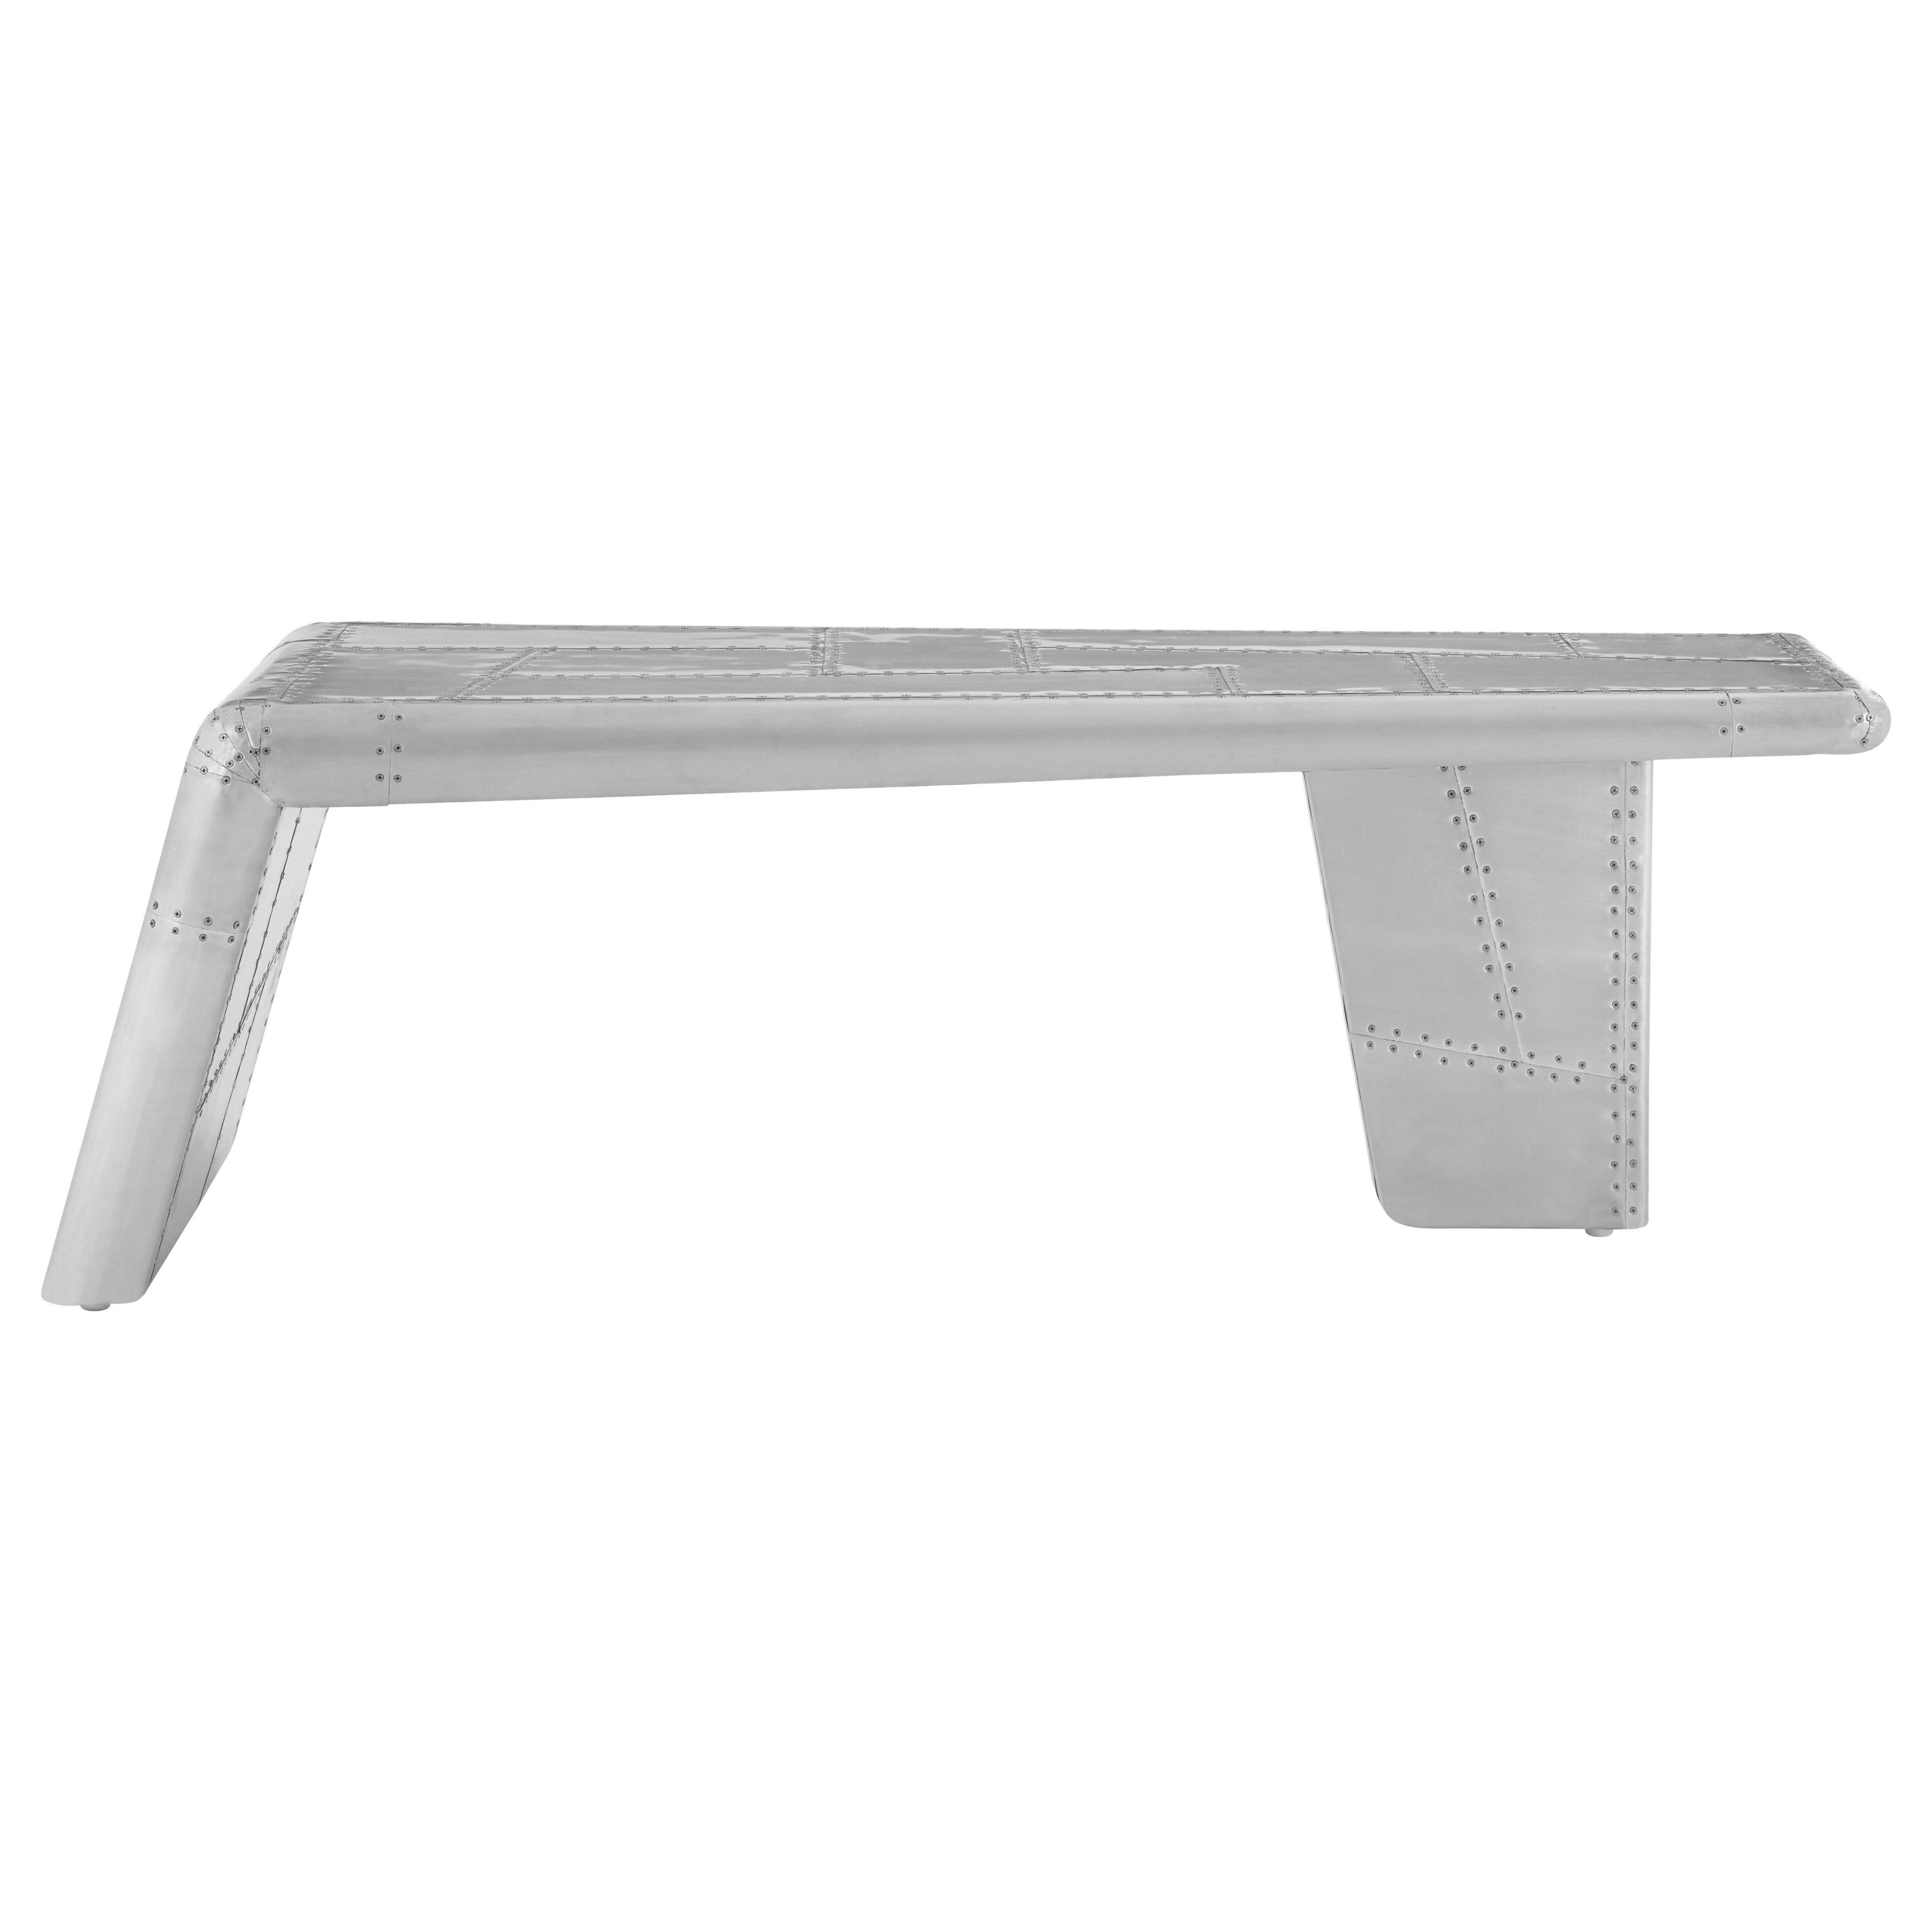 Avro Wing Coffee Table - image 1